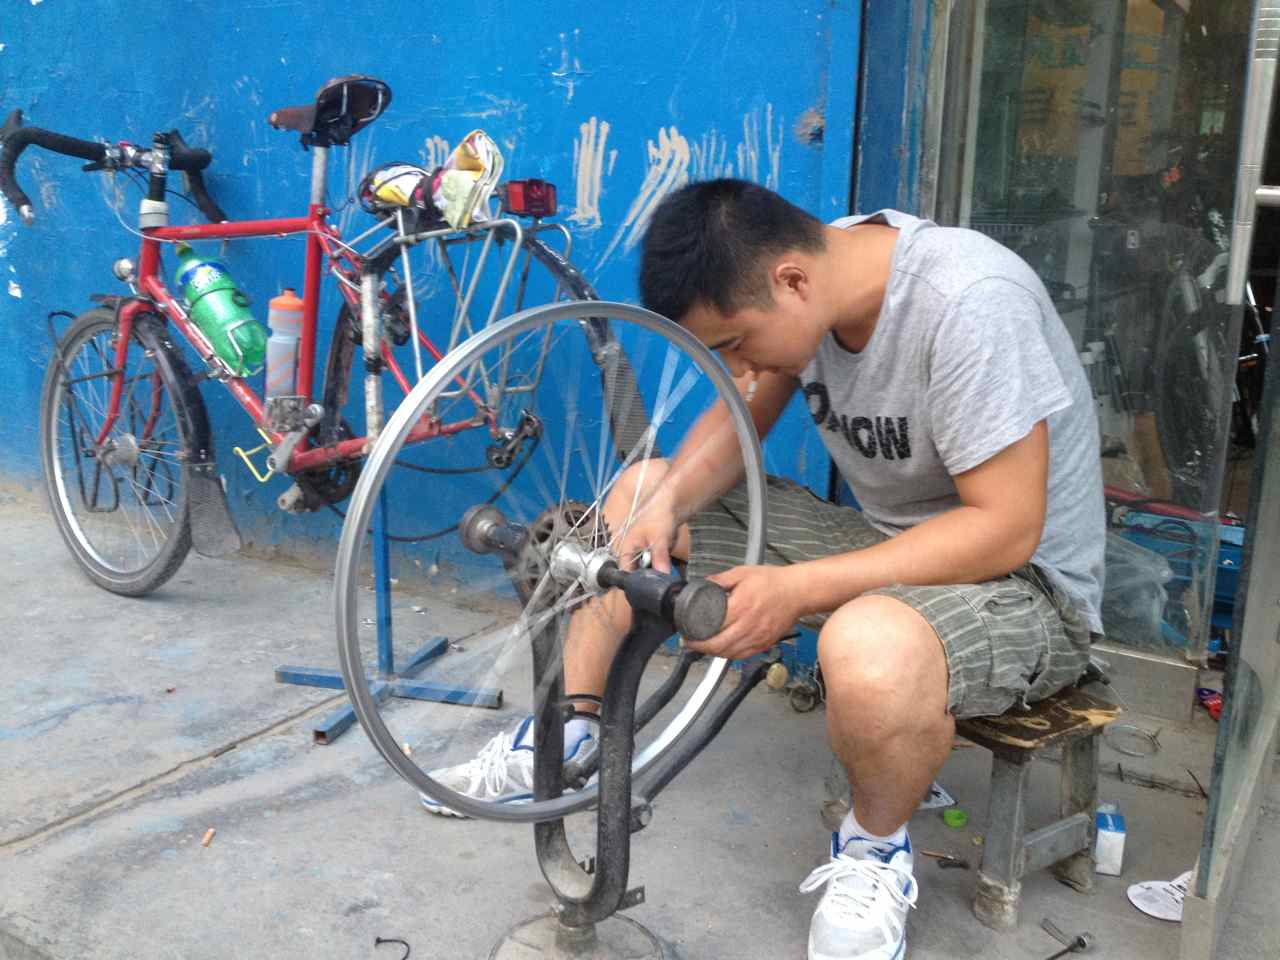 Getting my wheel trued at one of the 30 (!) bicycle shops in Korla